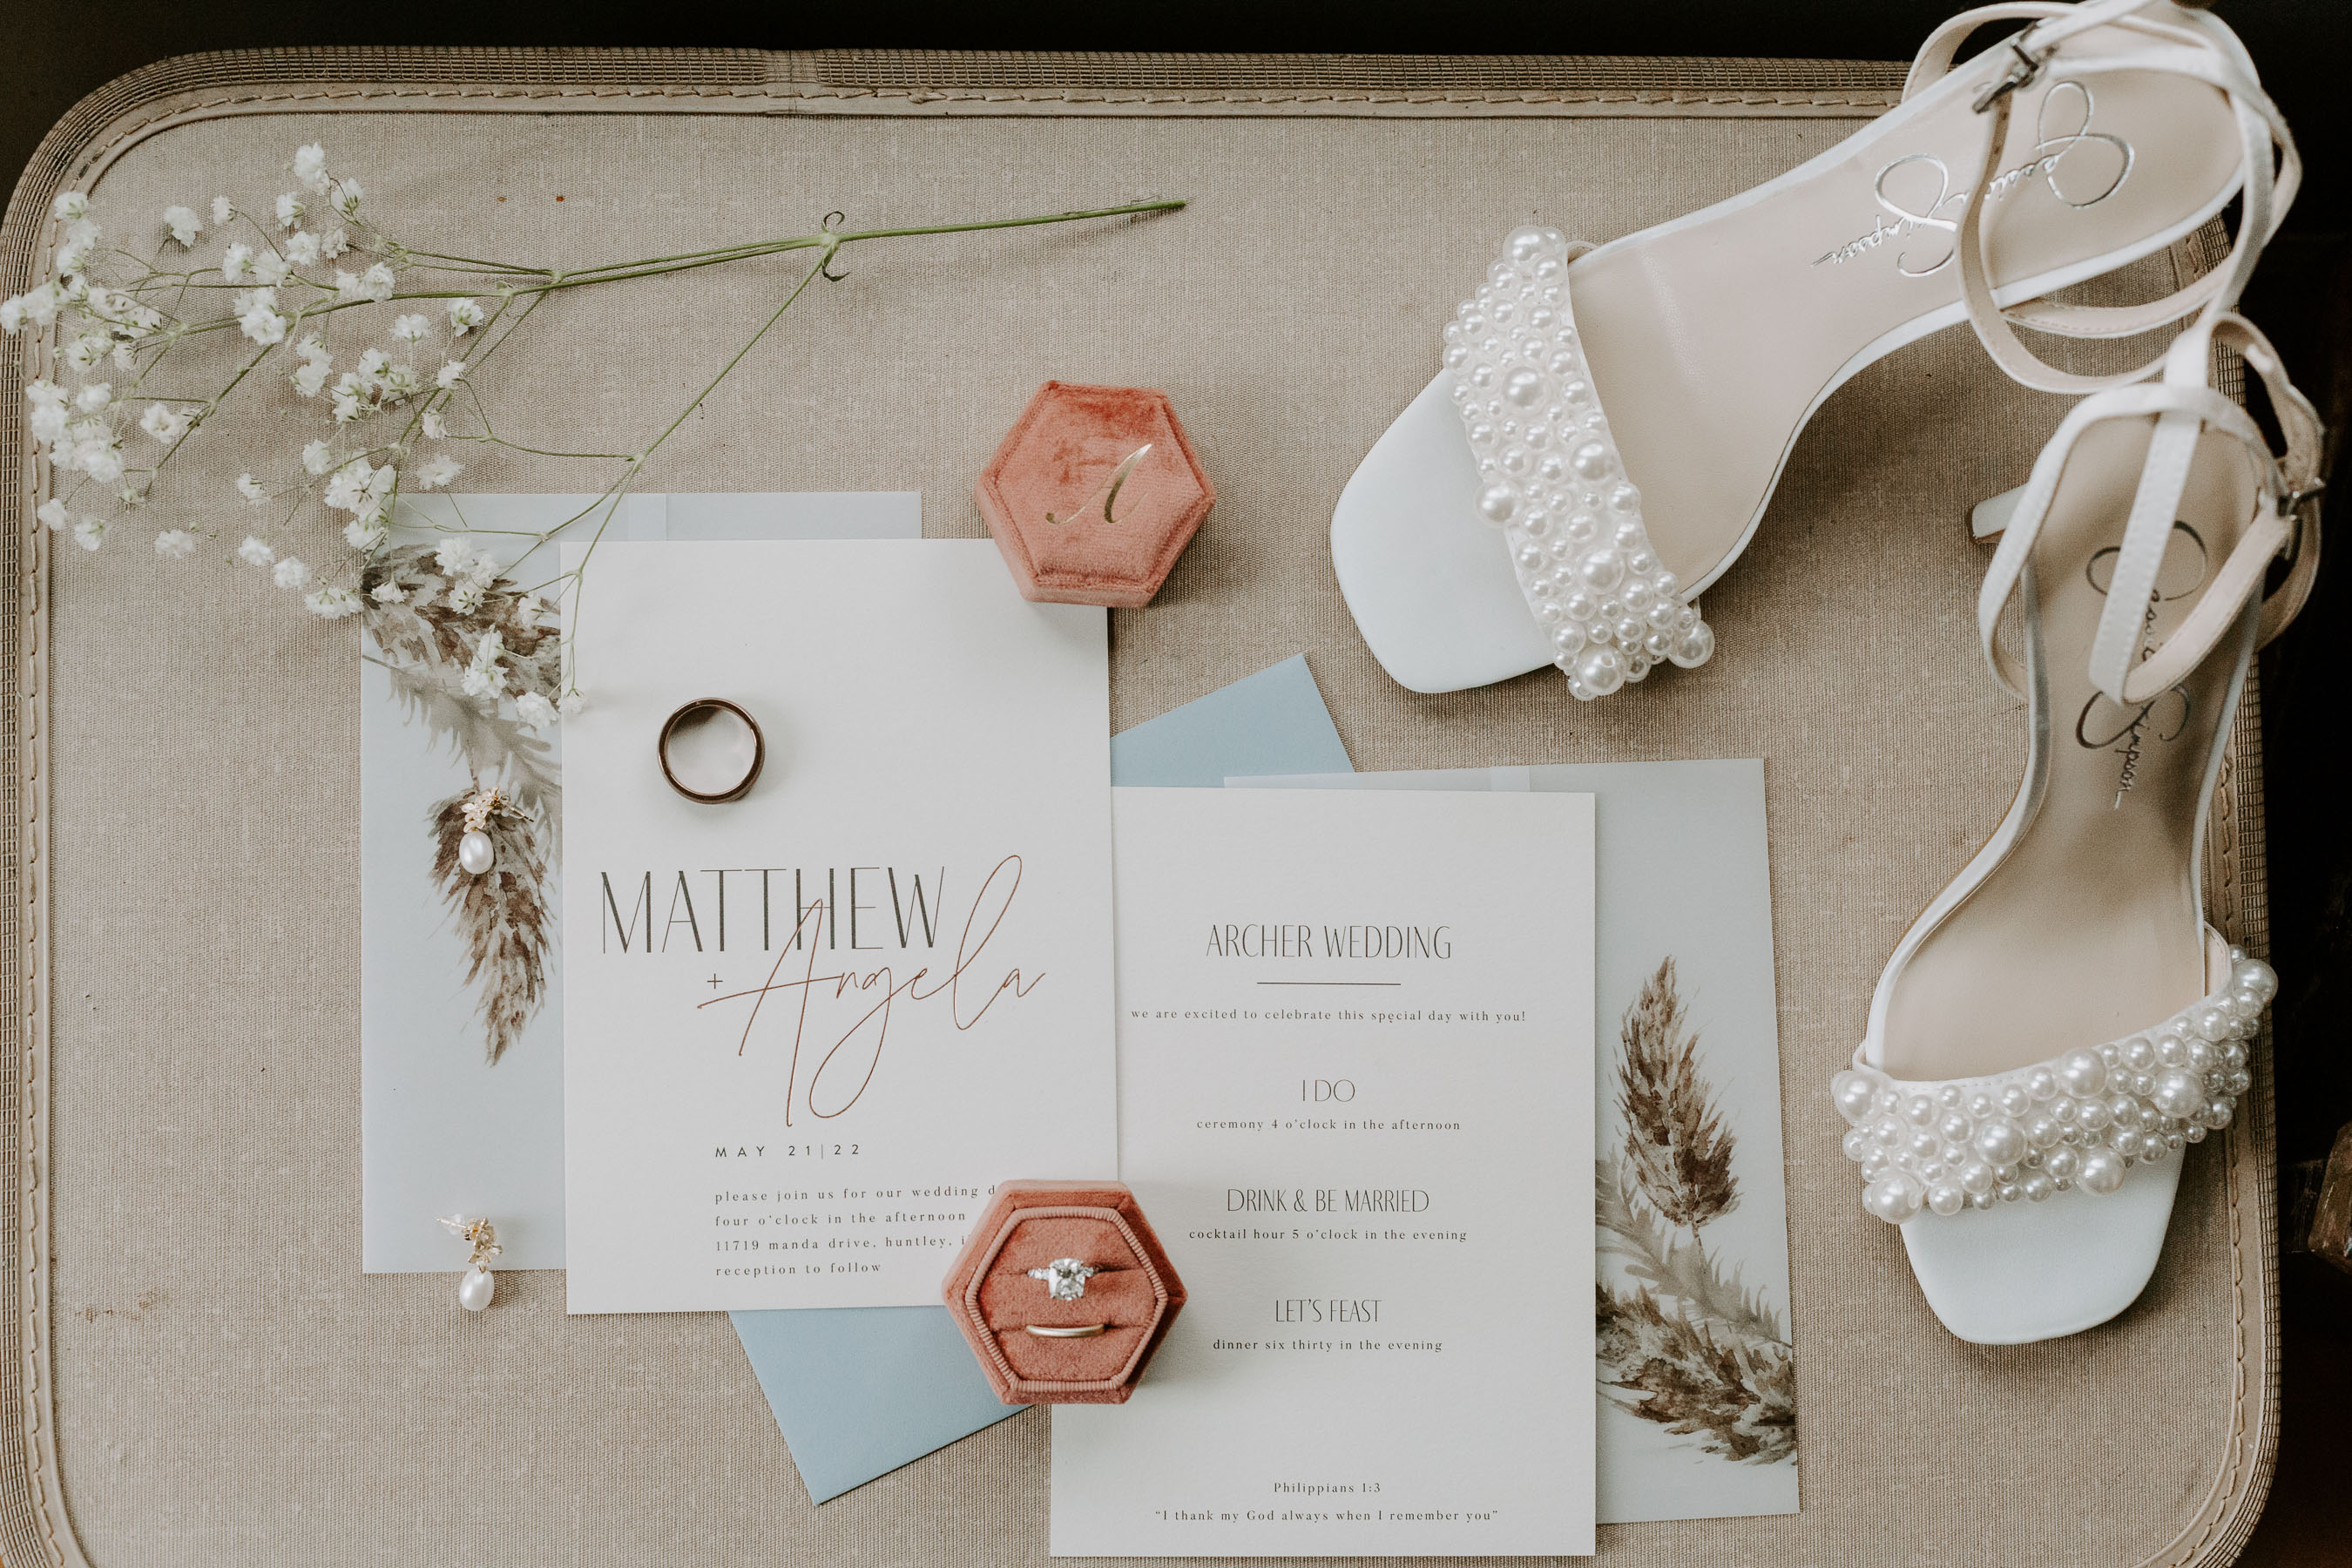 Wedding invitation suite detail photos with wedding rings, shoes, and flowers